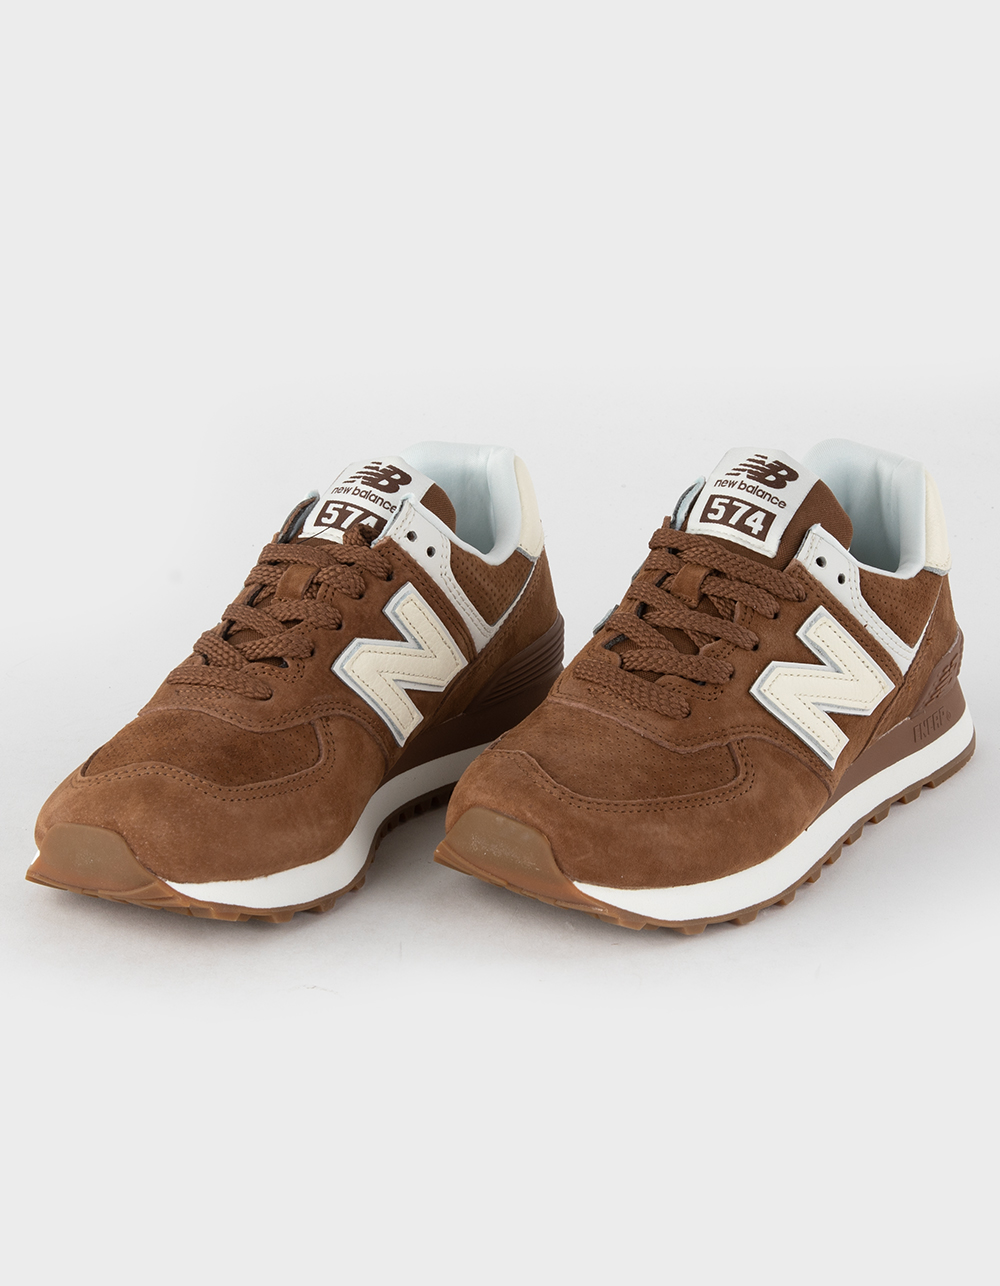 NEW BALANCE 574 Womens Shoes - BROWN | Tillys